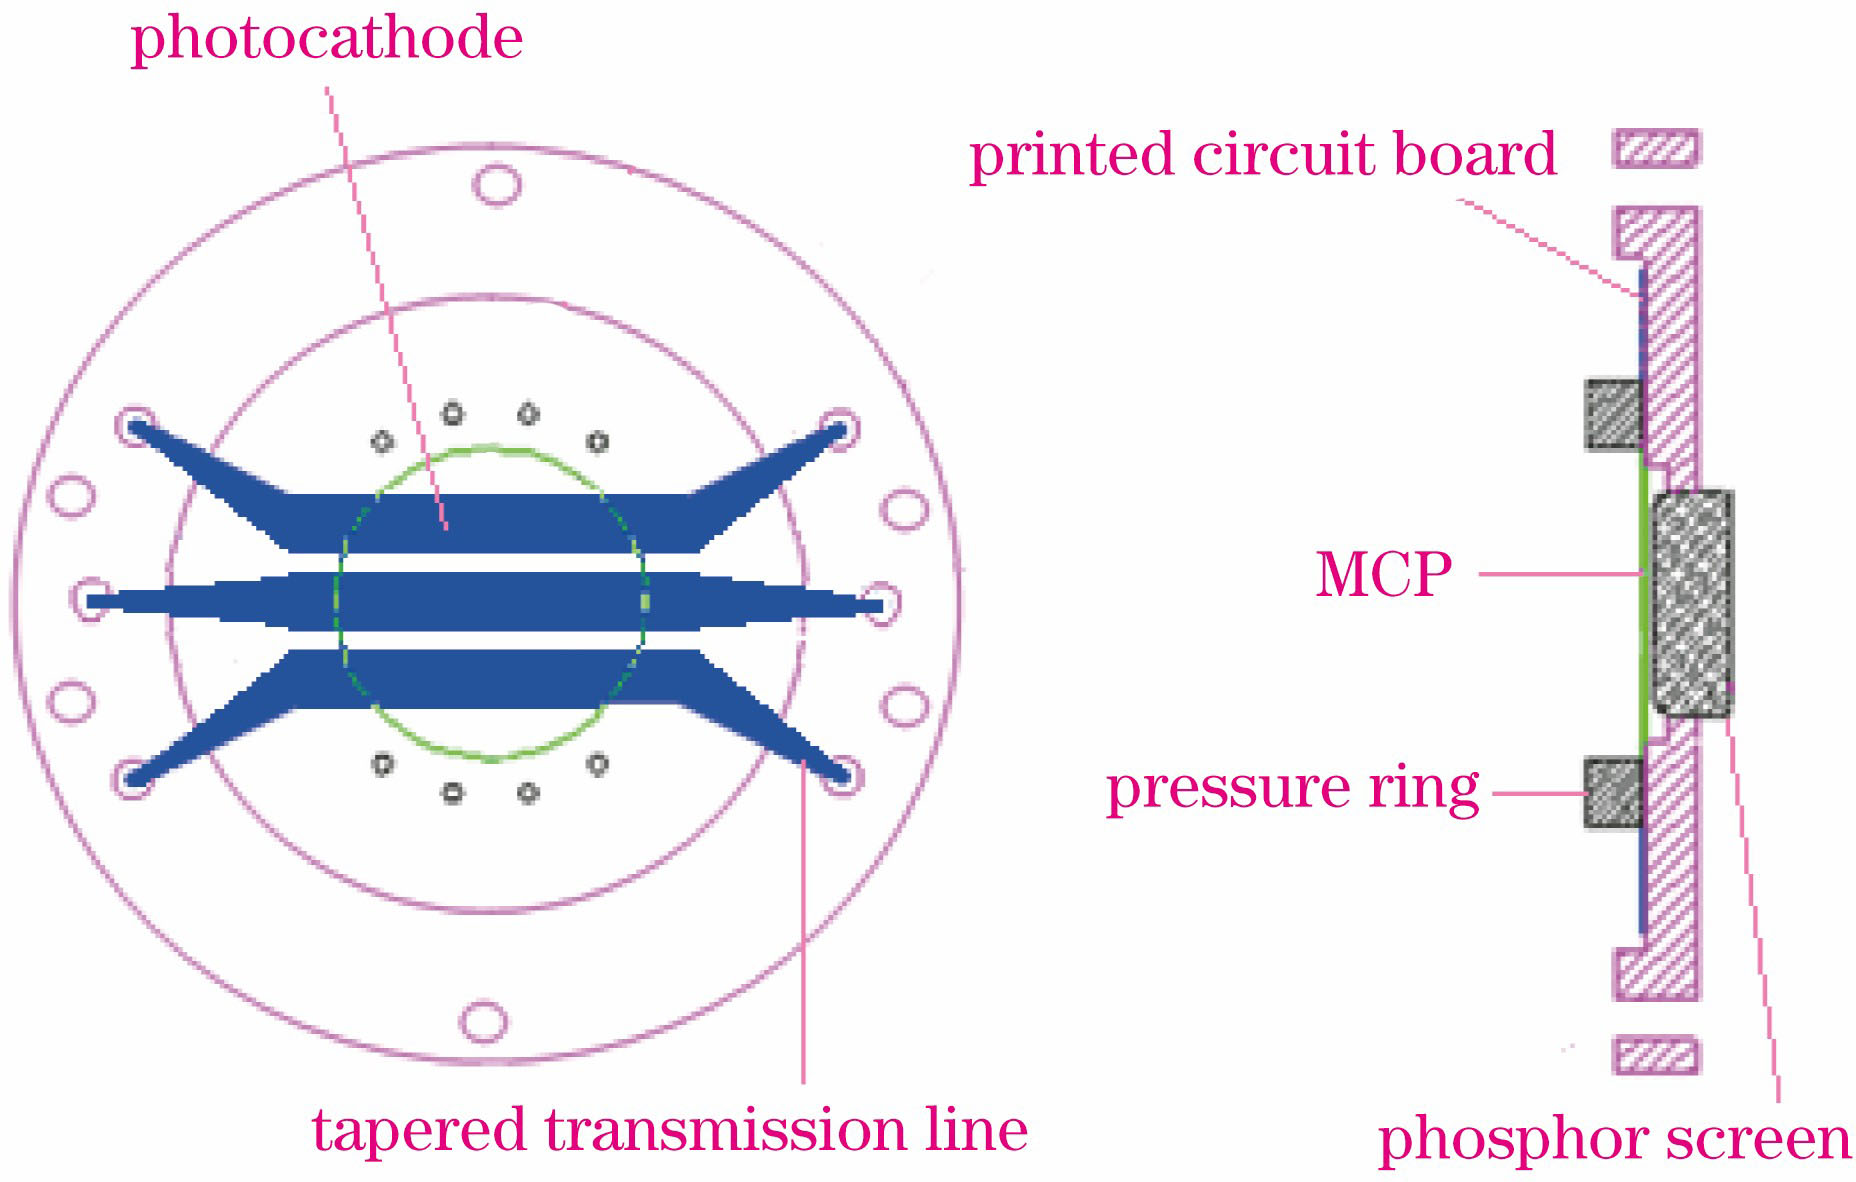 Structural diagram of MCP imager